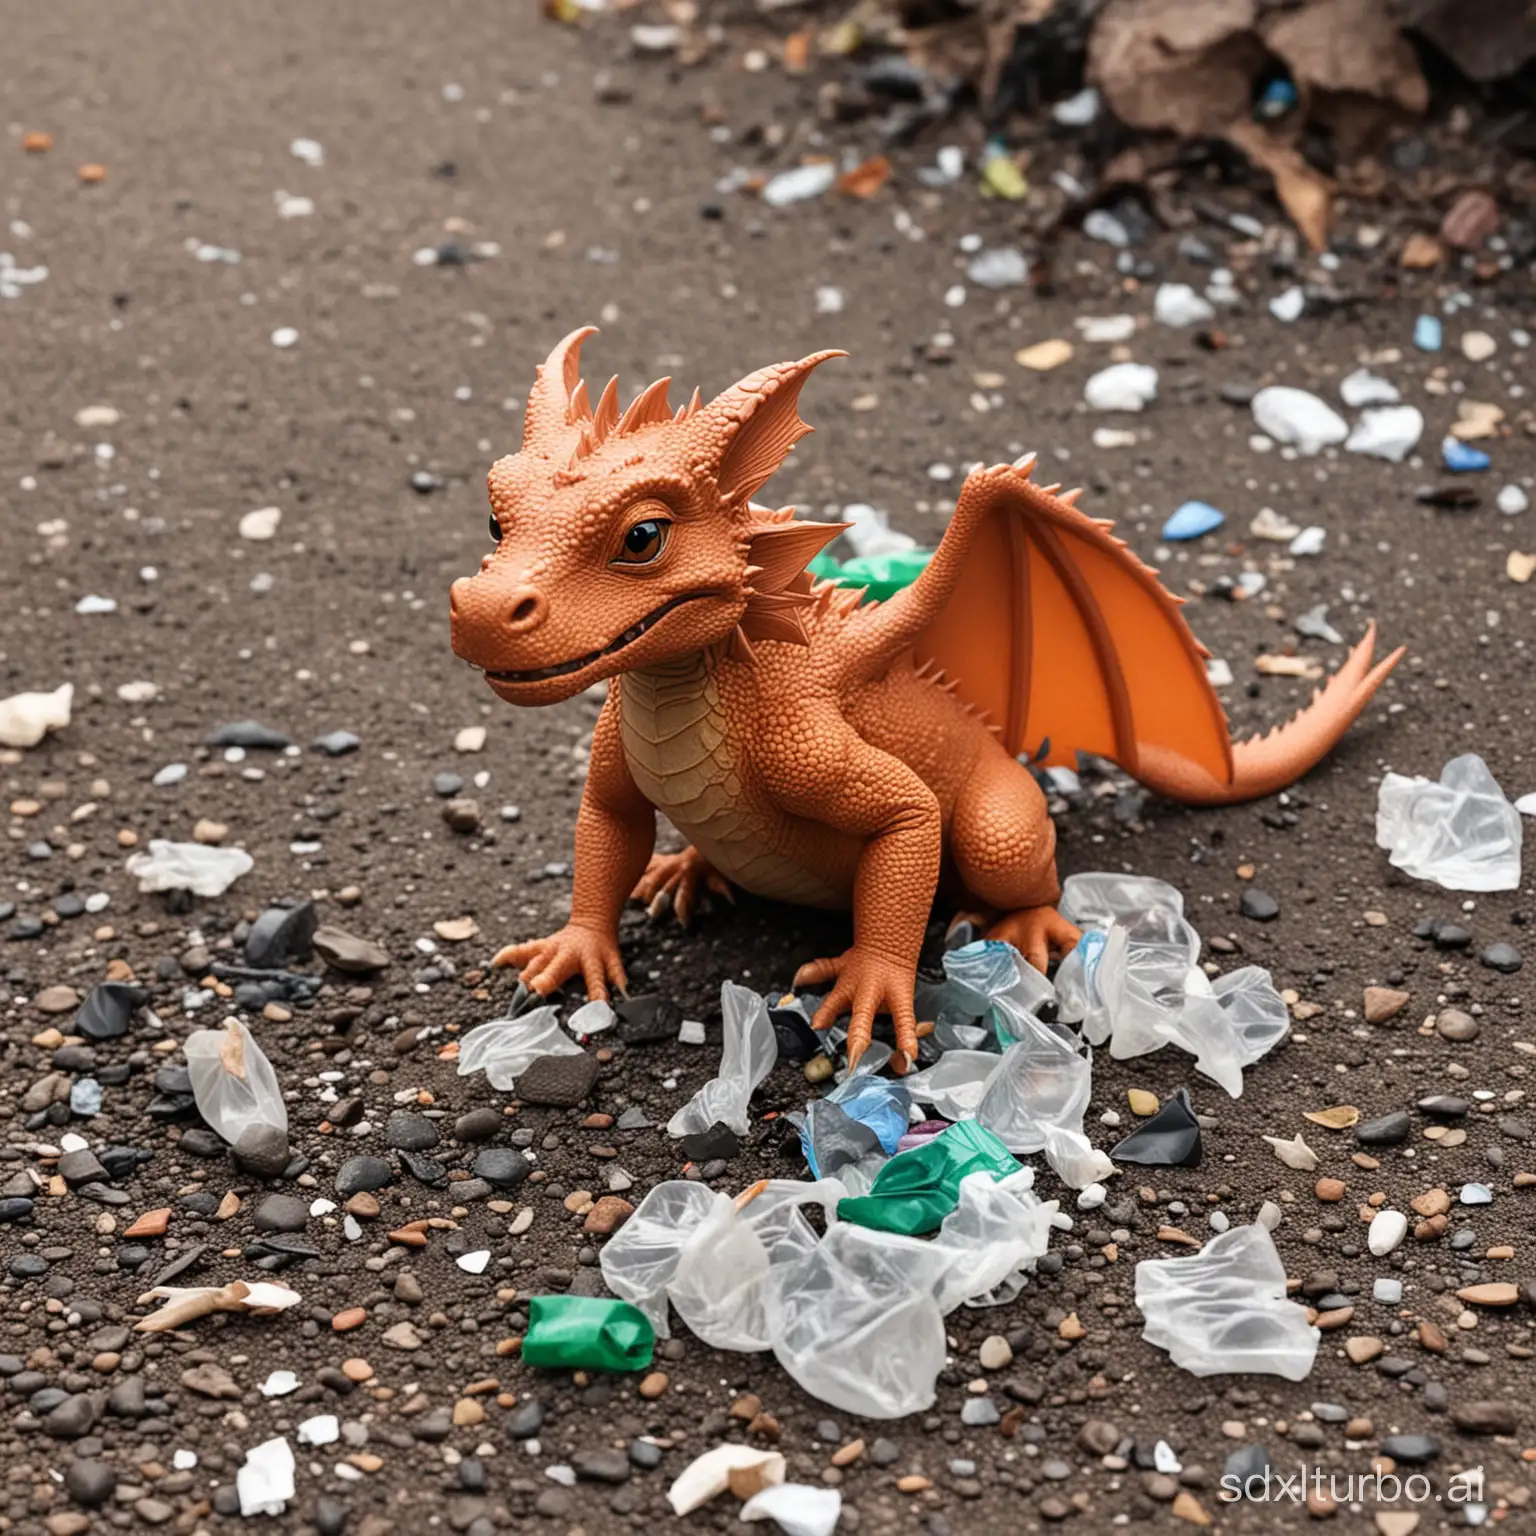 The little dragon is picking up garbage